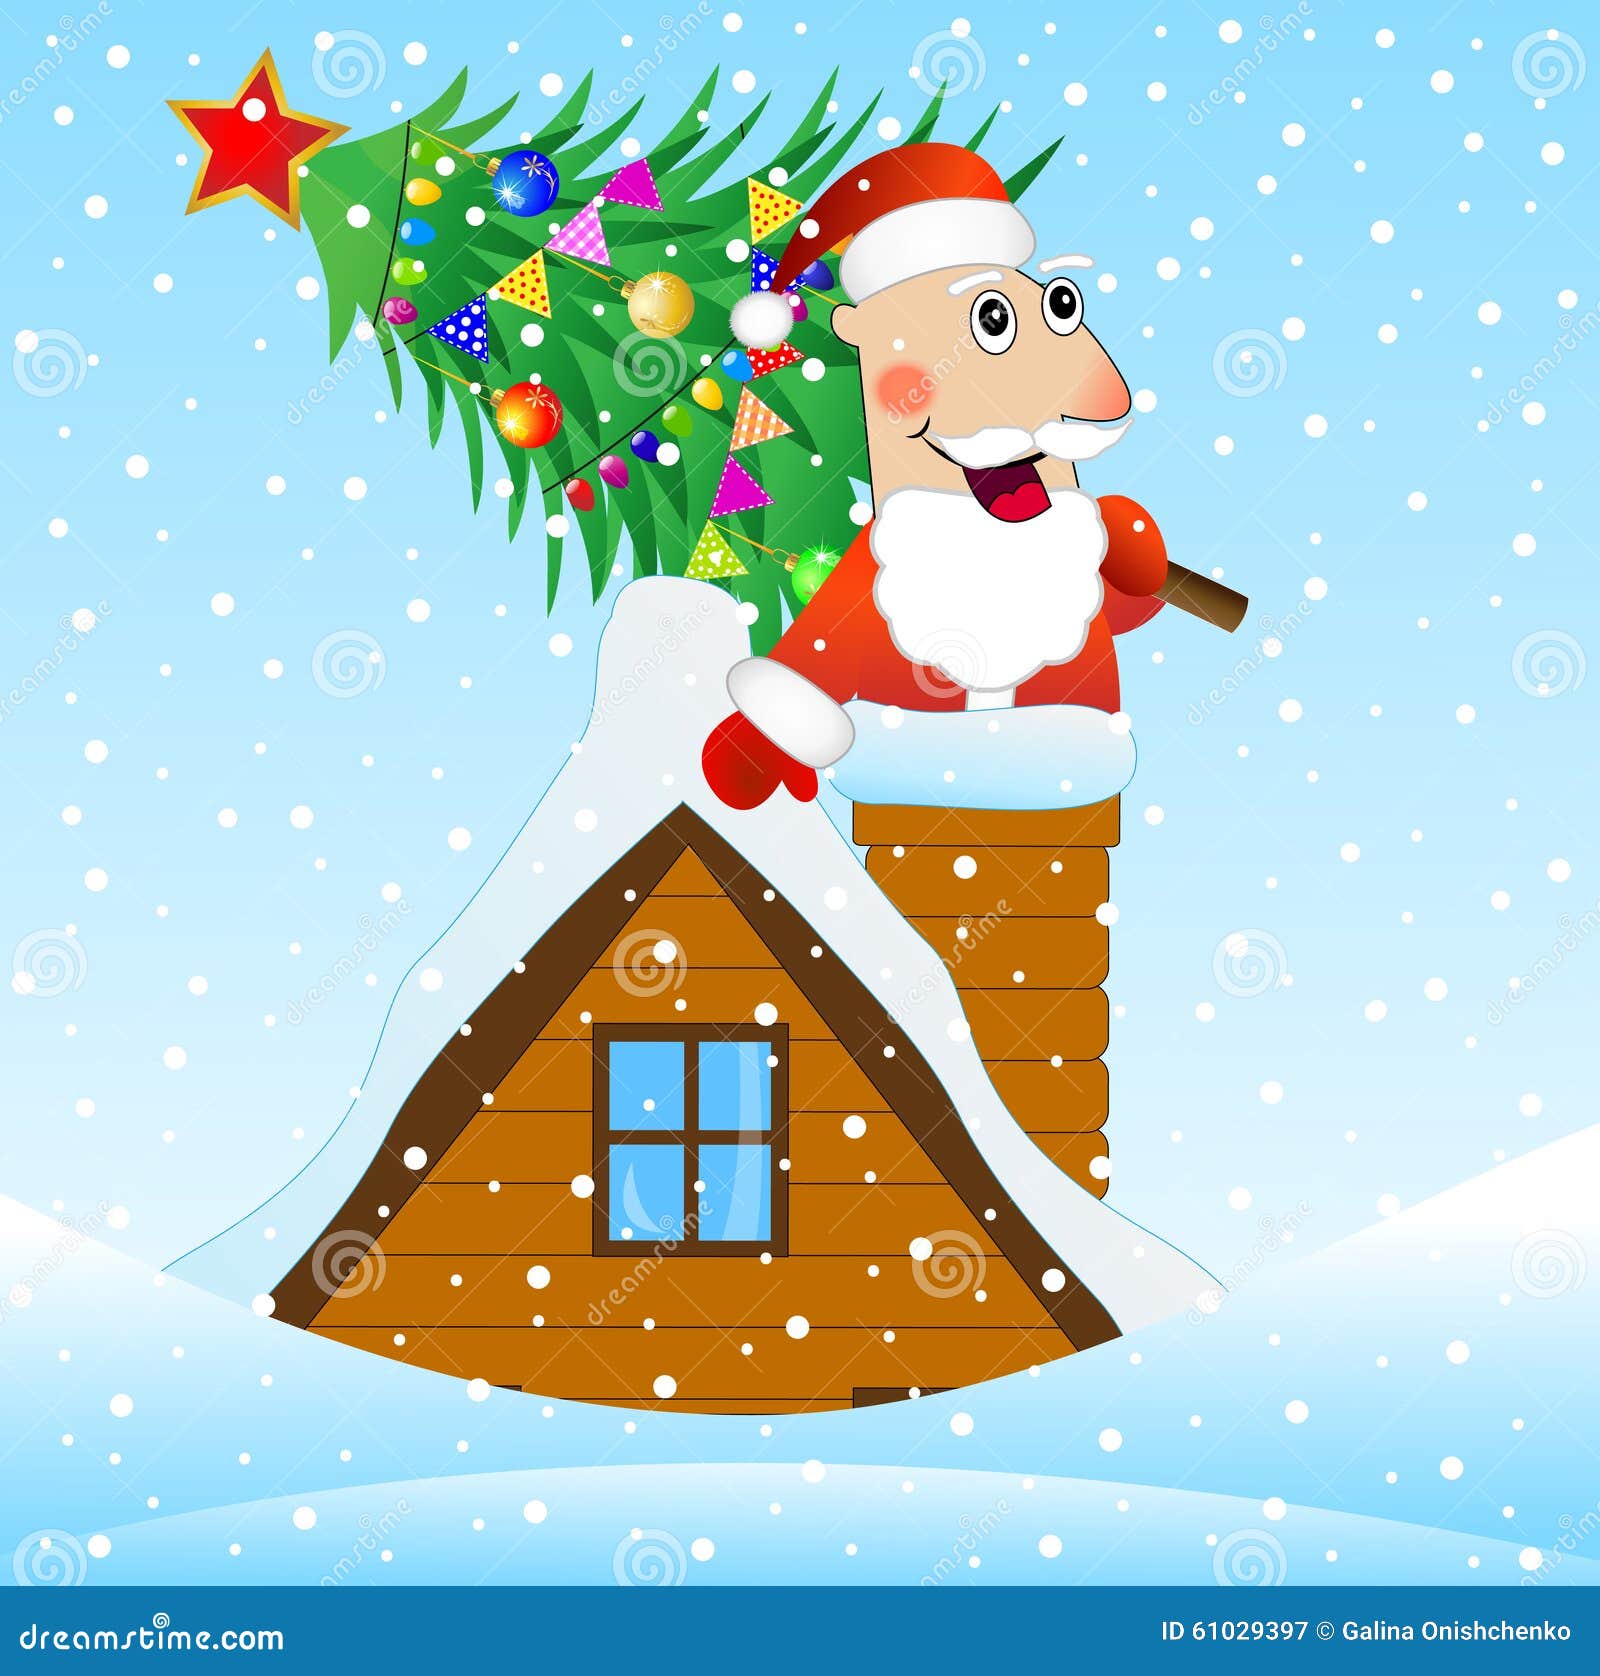 Santa Claus On The Roof Of A House With A Christmas Tree Stock Vector - Illustration of house ...